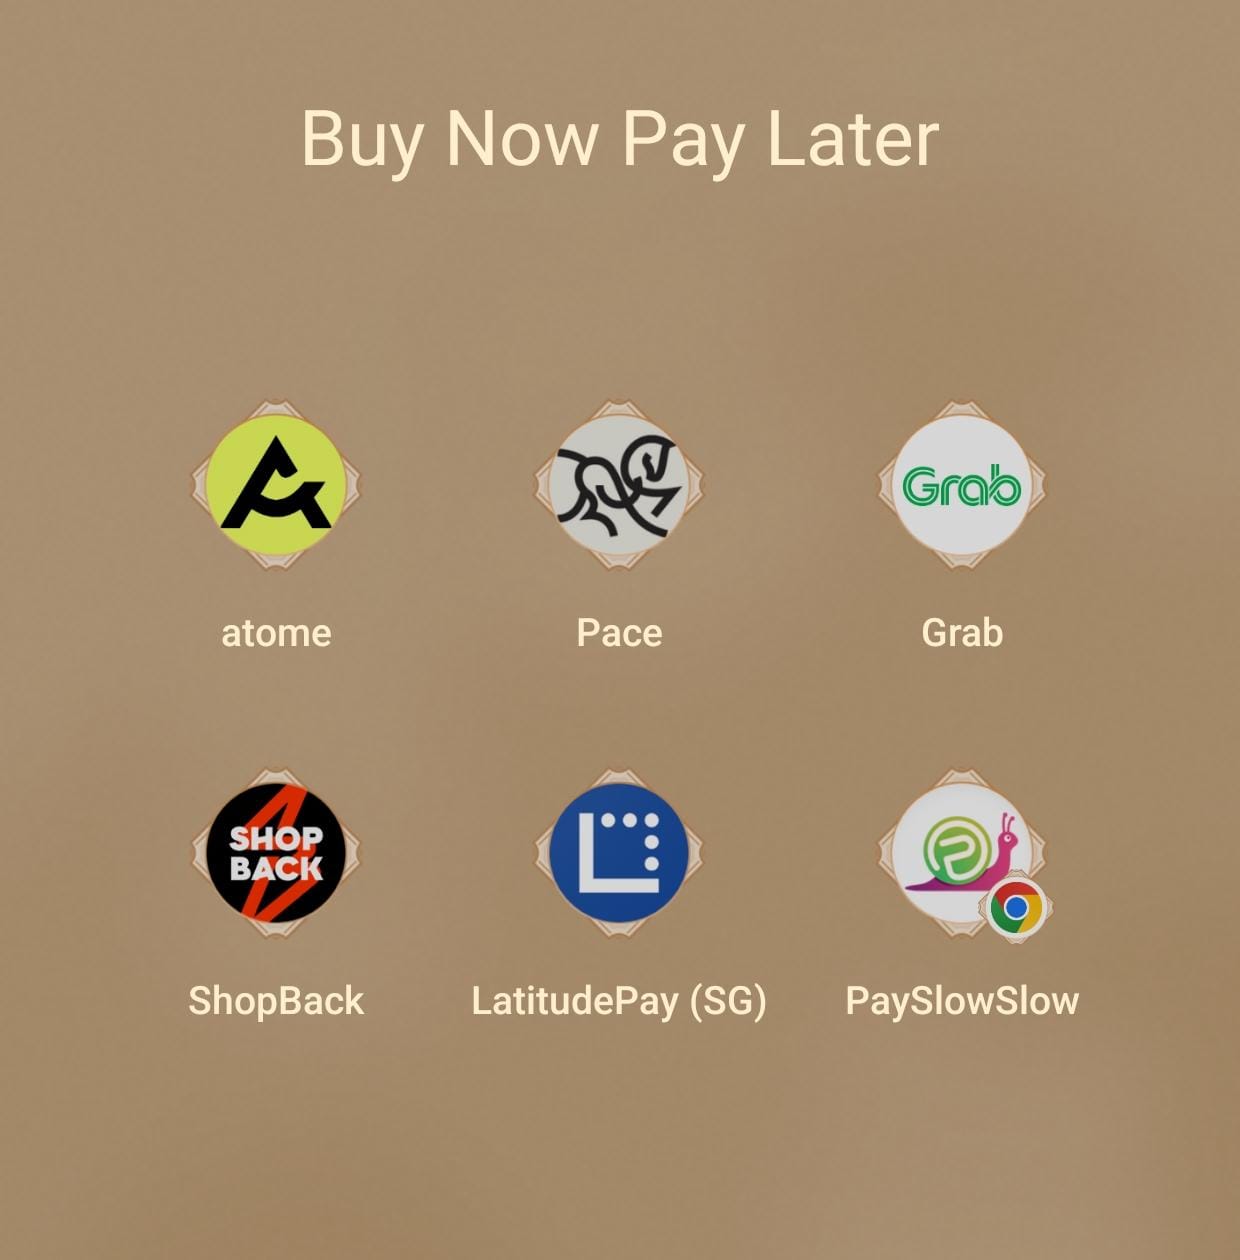 BNPL Apps in Singapore from Atome Pace Grab Shopback Latitude Pay and PaySlowSlow